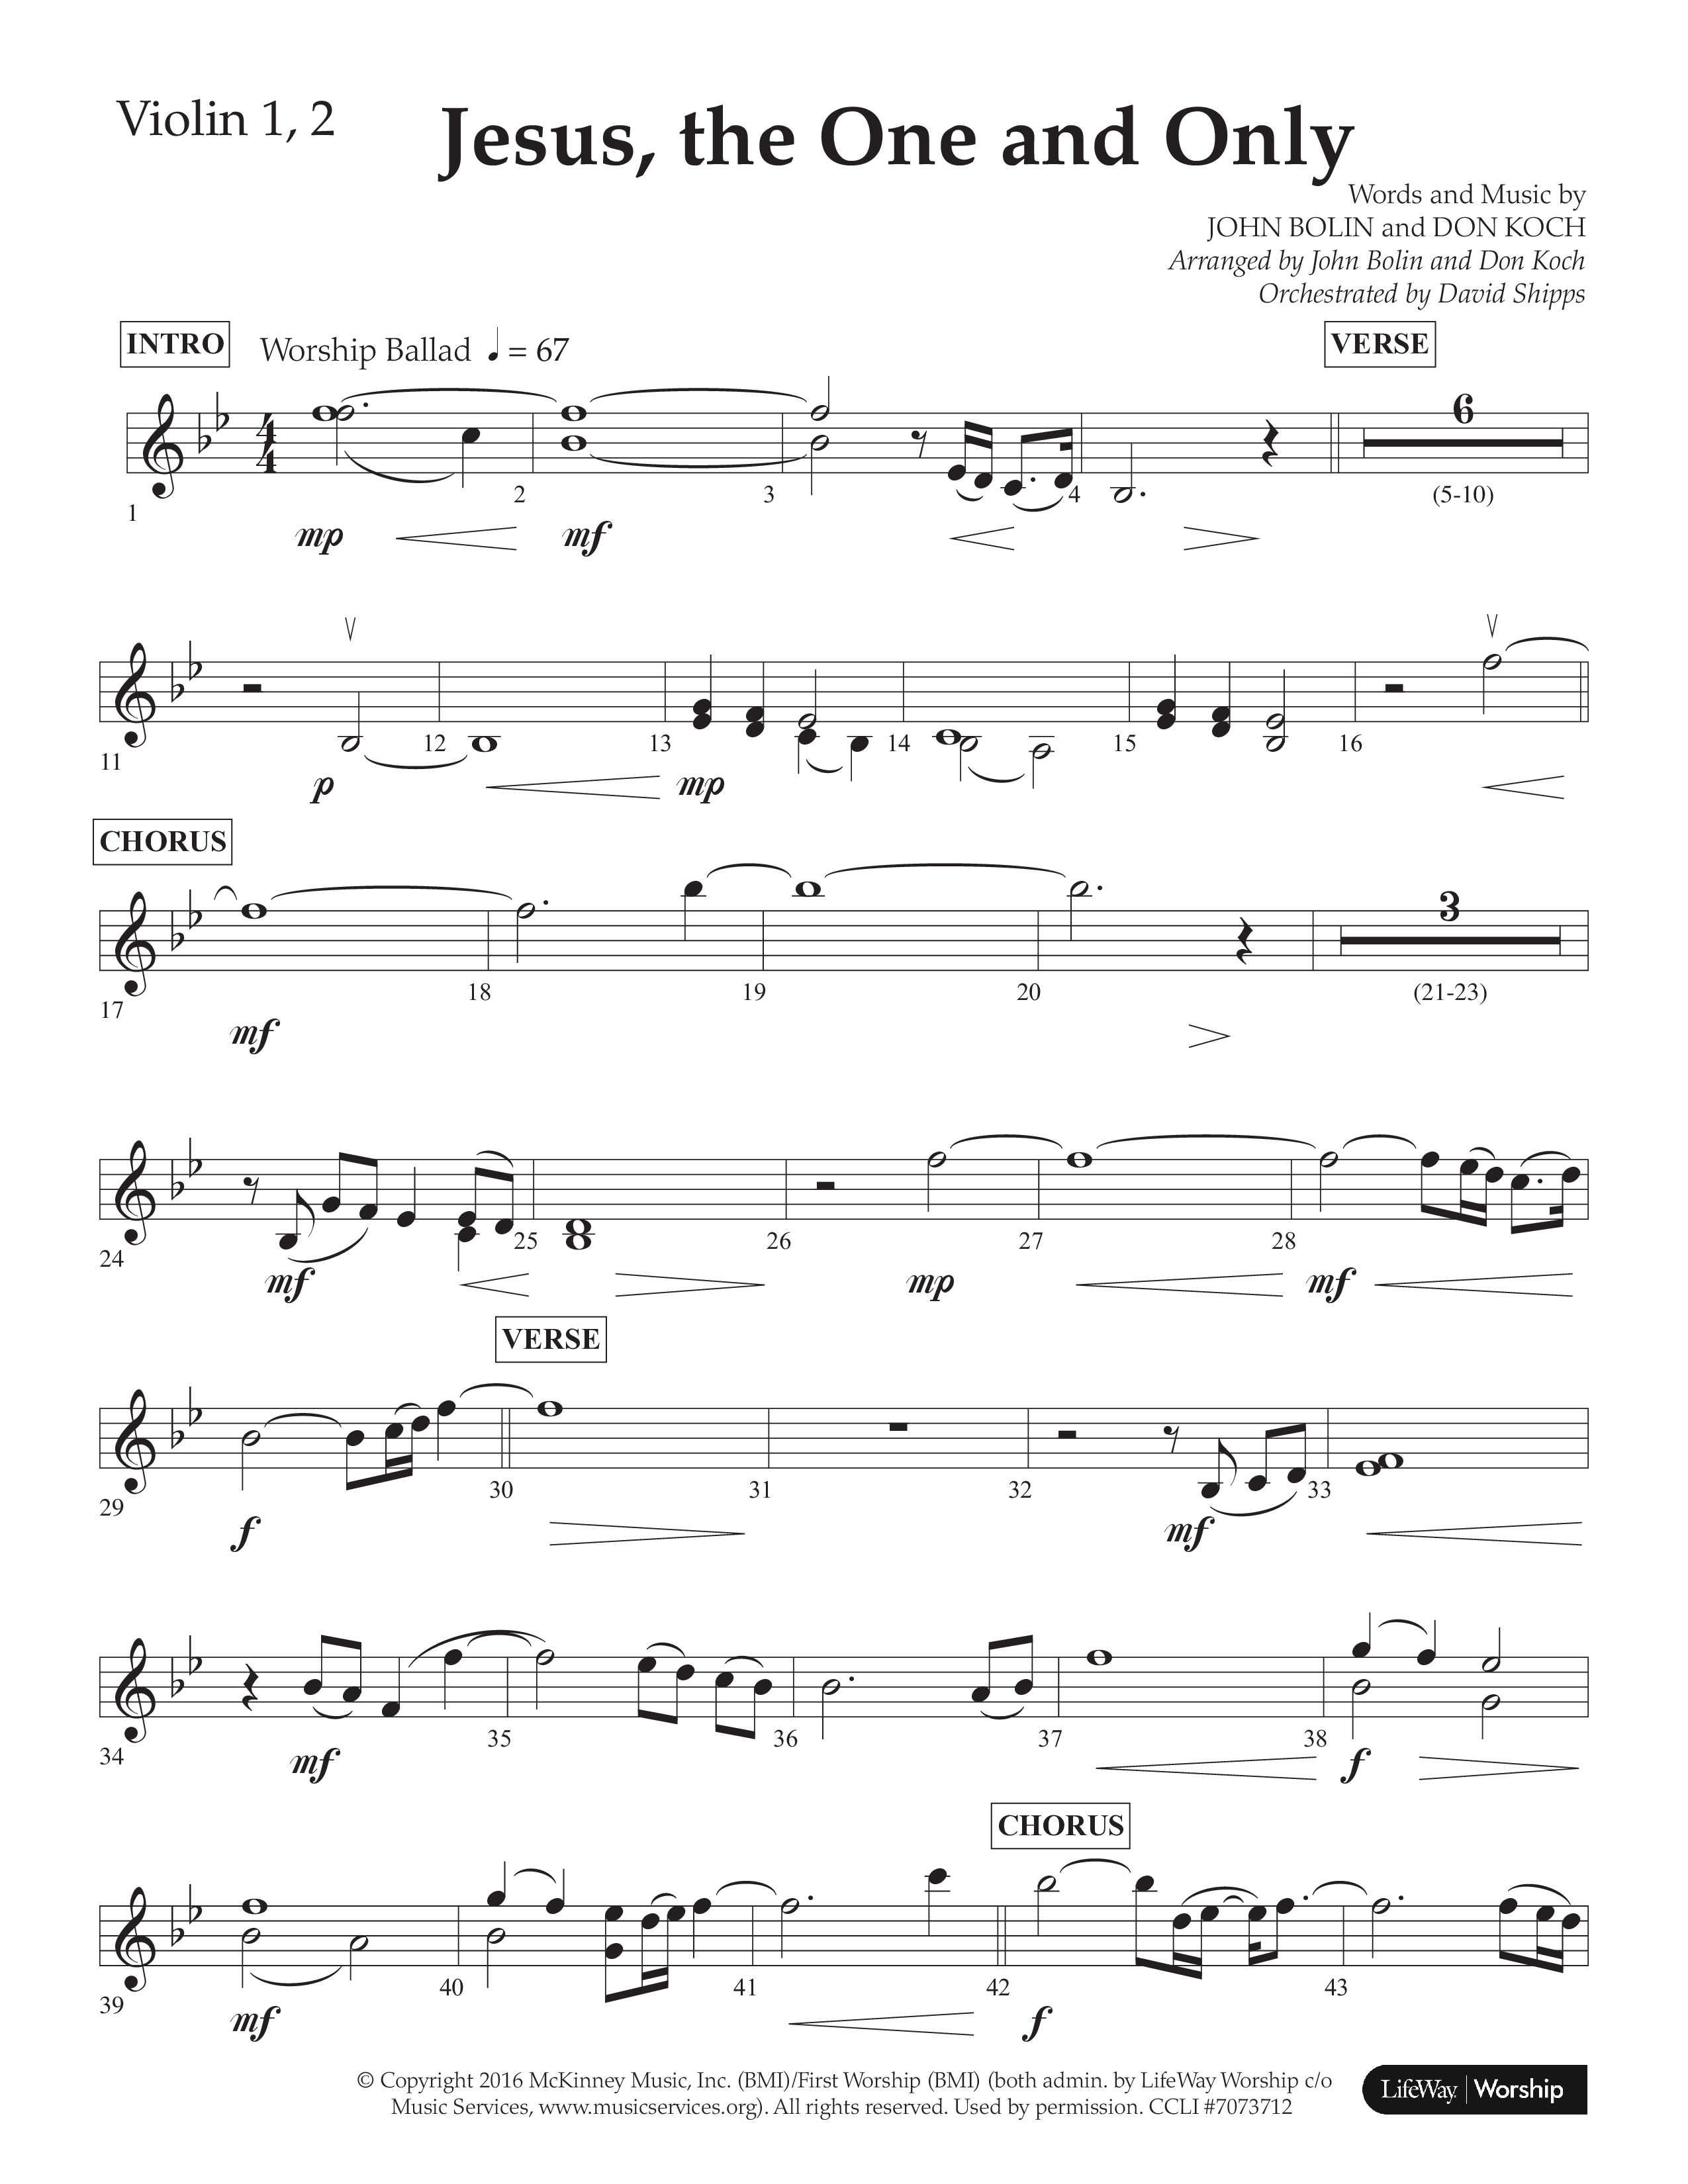 Jesus The One And Only (Choral Anthem SATB) Violin 1/2 (Lifeway Choral / Arr. John Bolin / Arr. Don Koch / Orch. David Shipps)